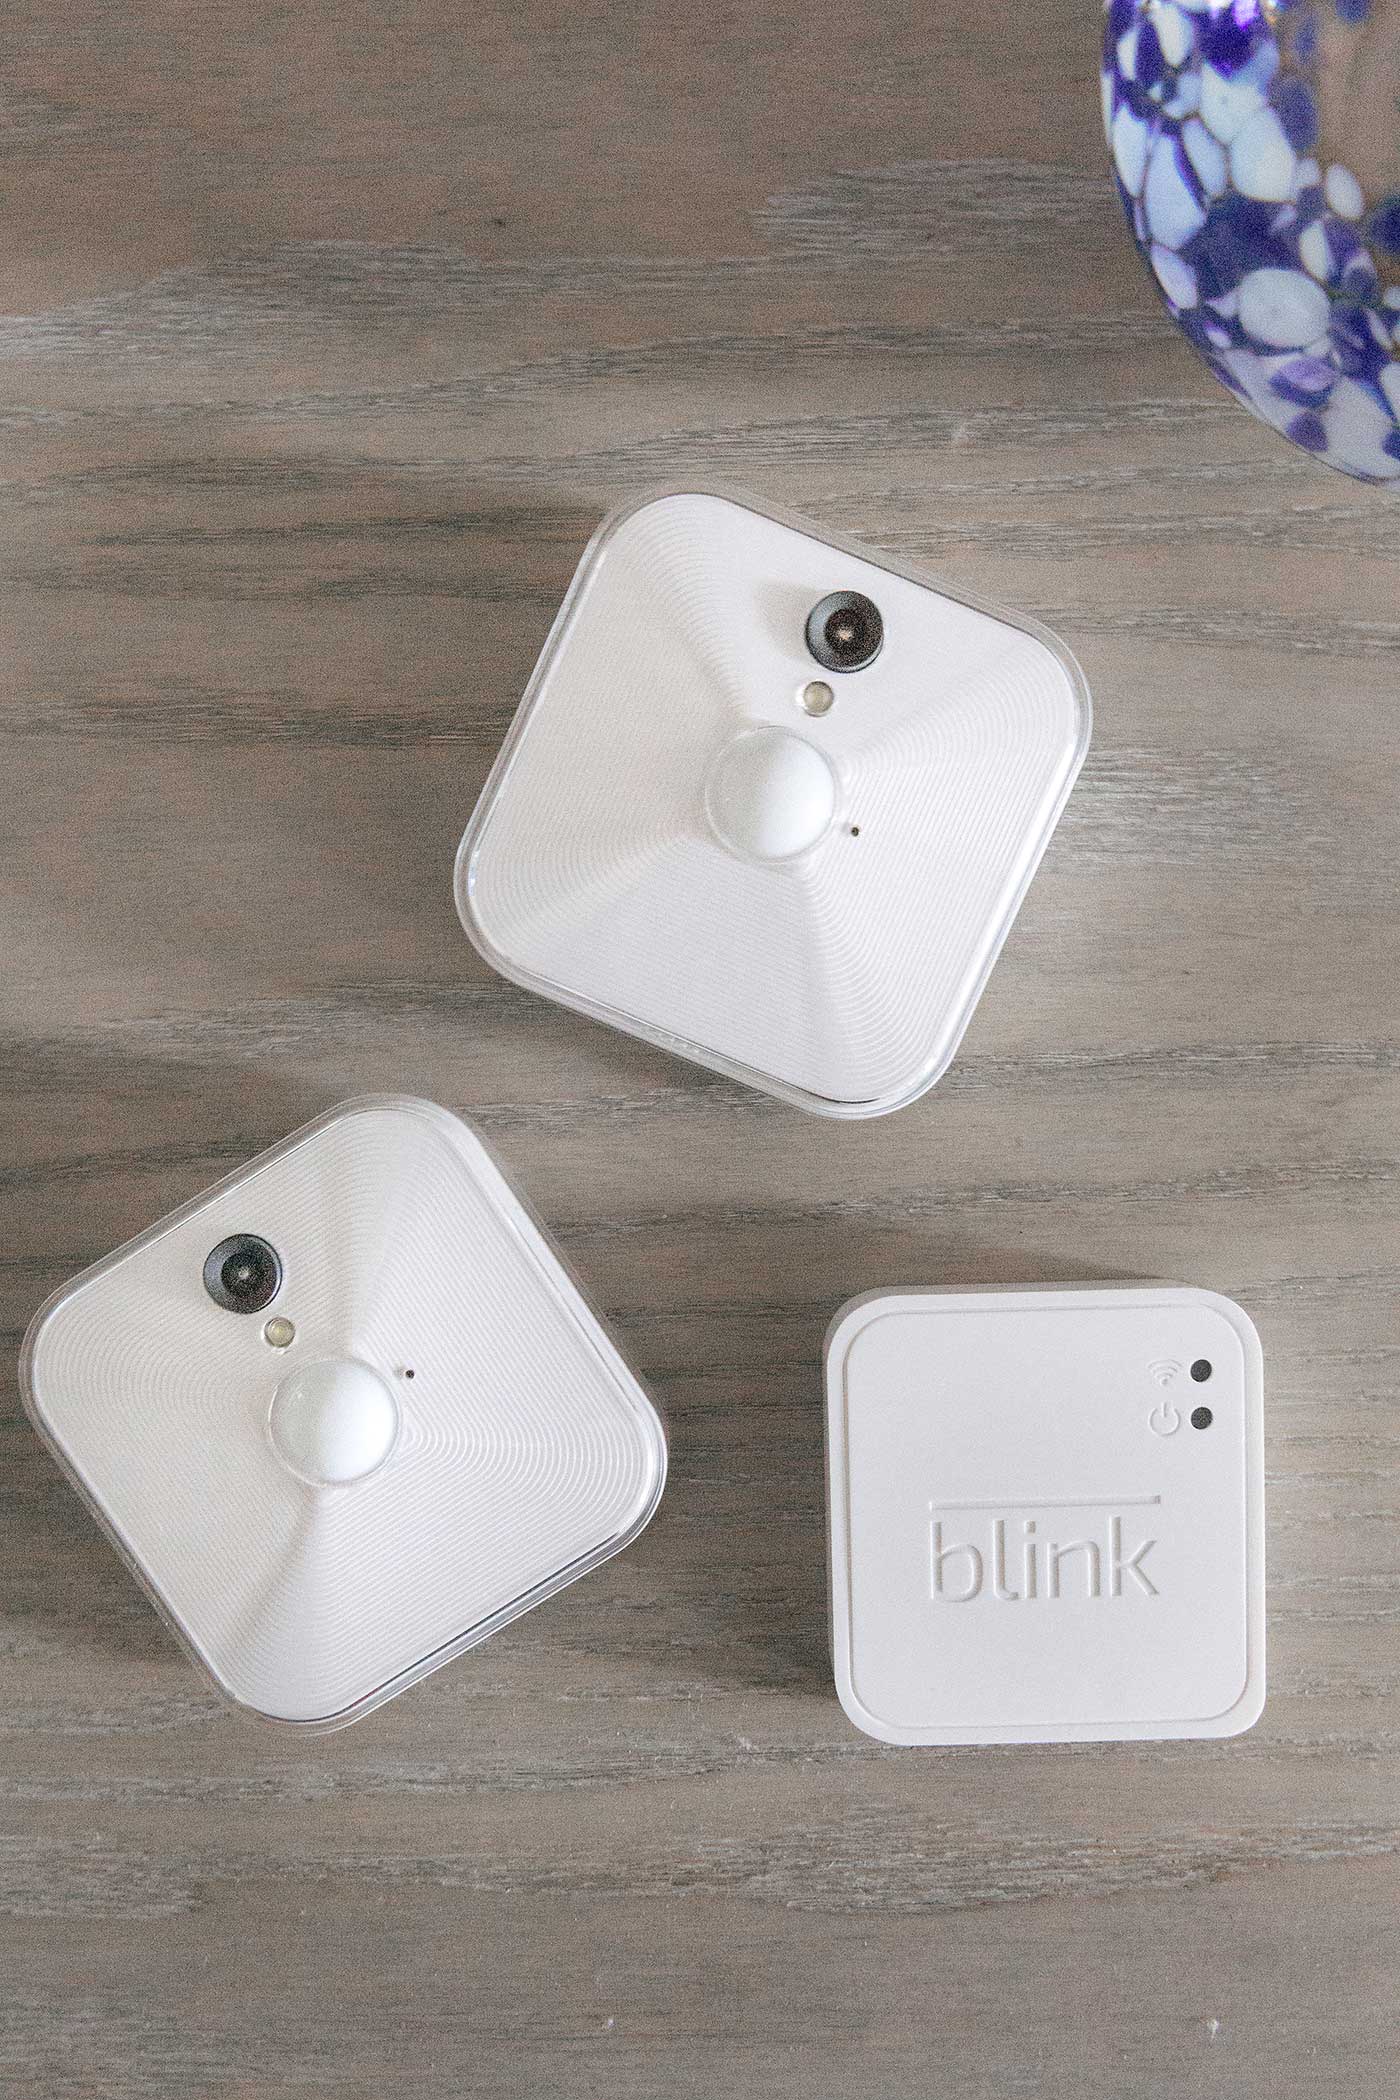 Blink Home Security Reviews